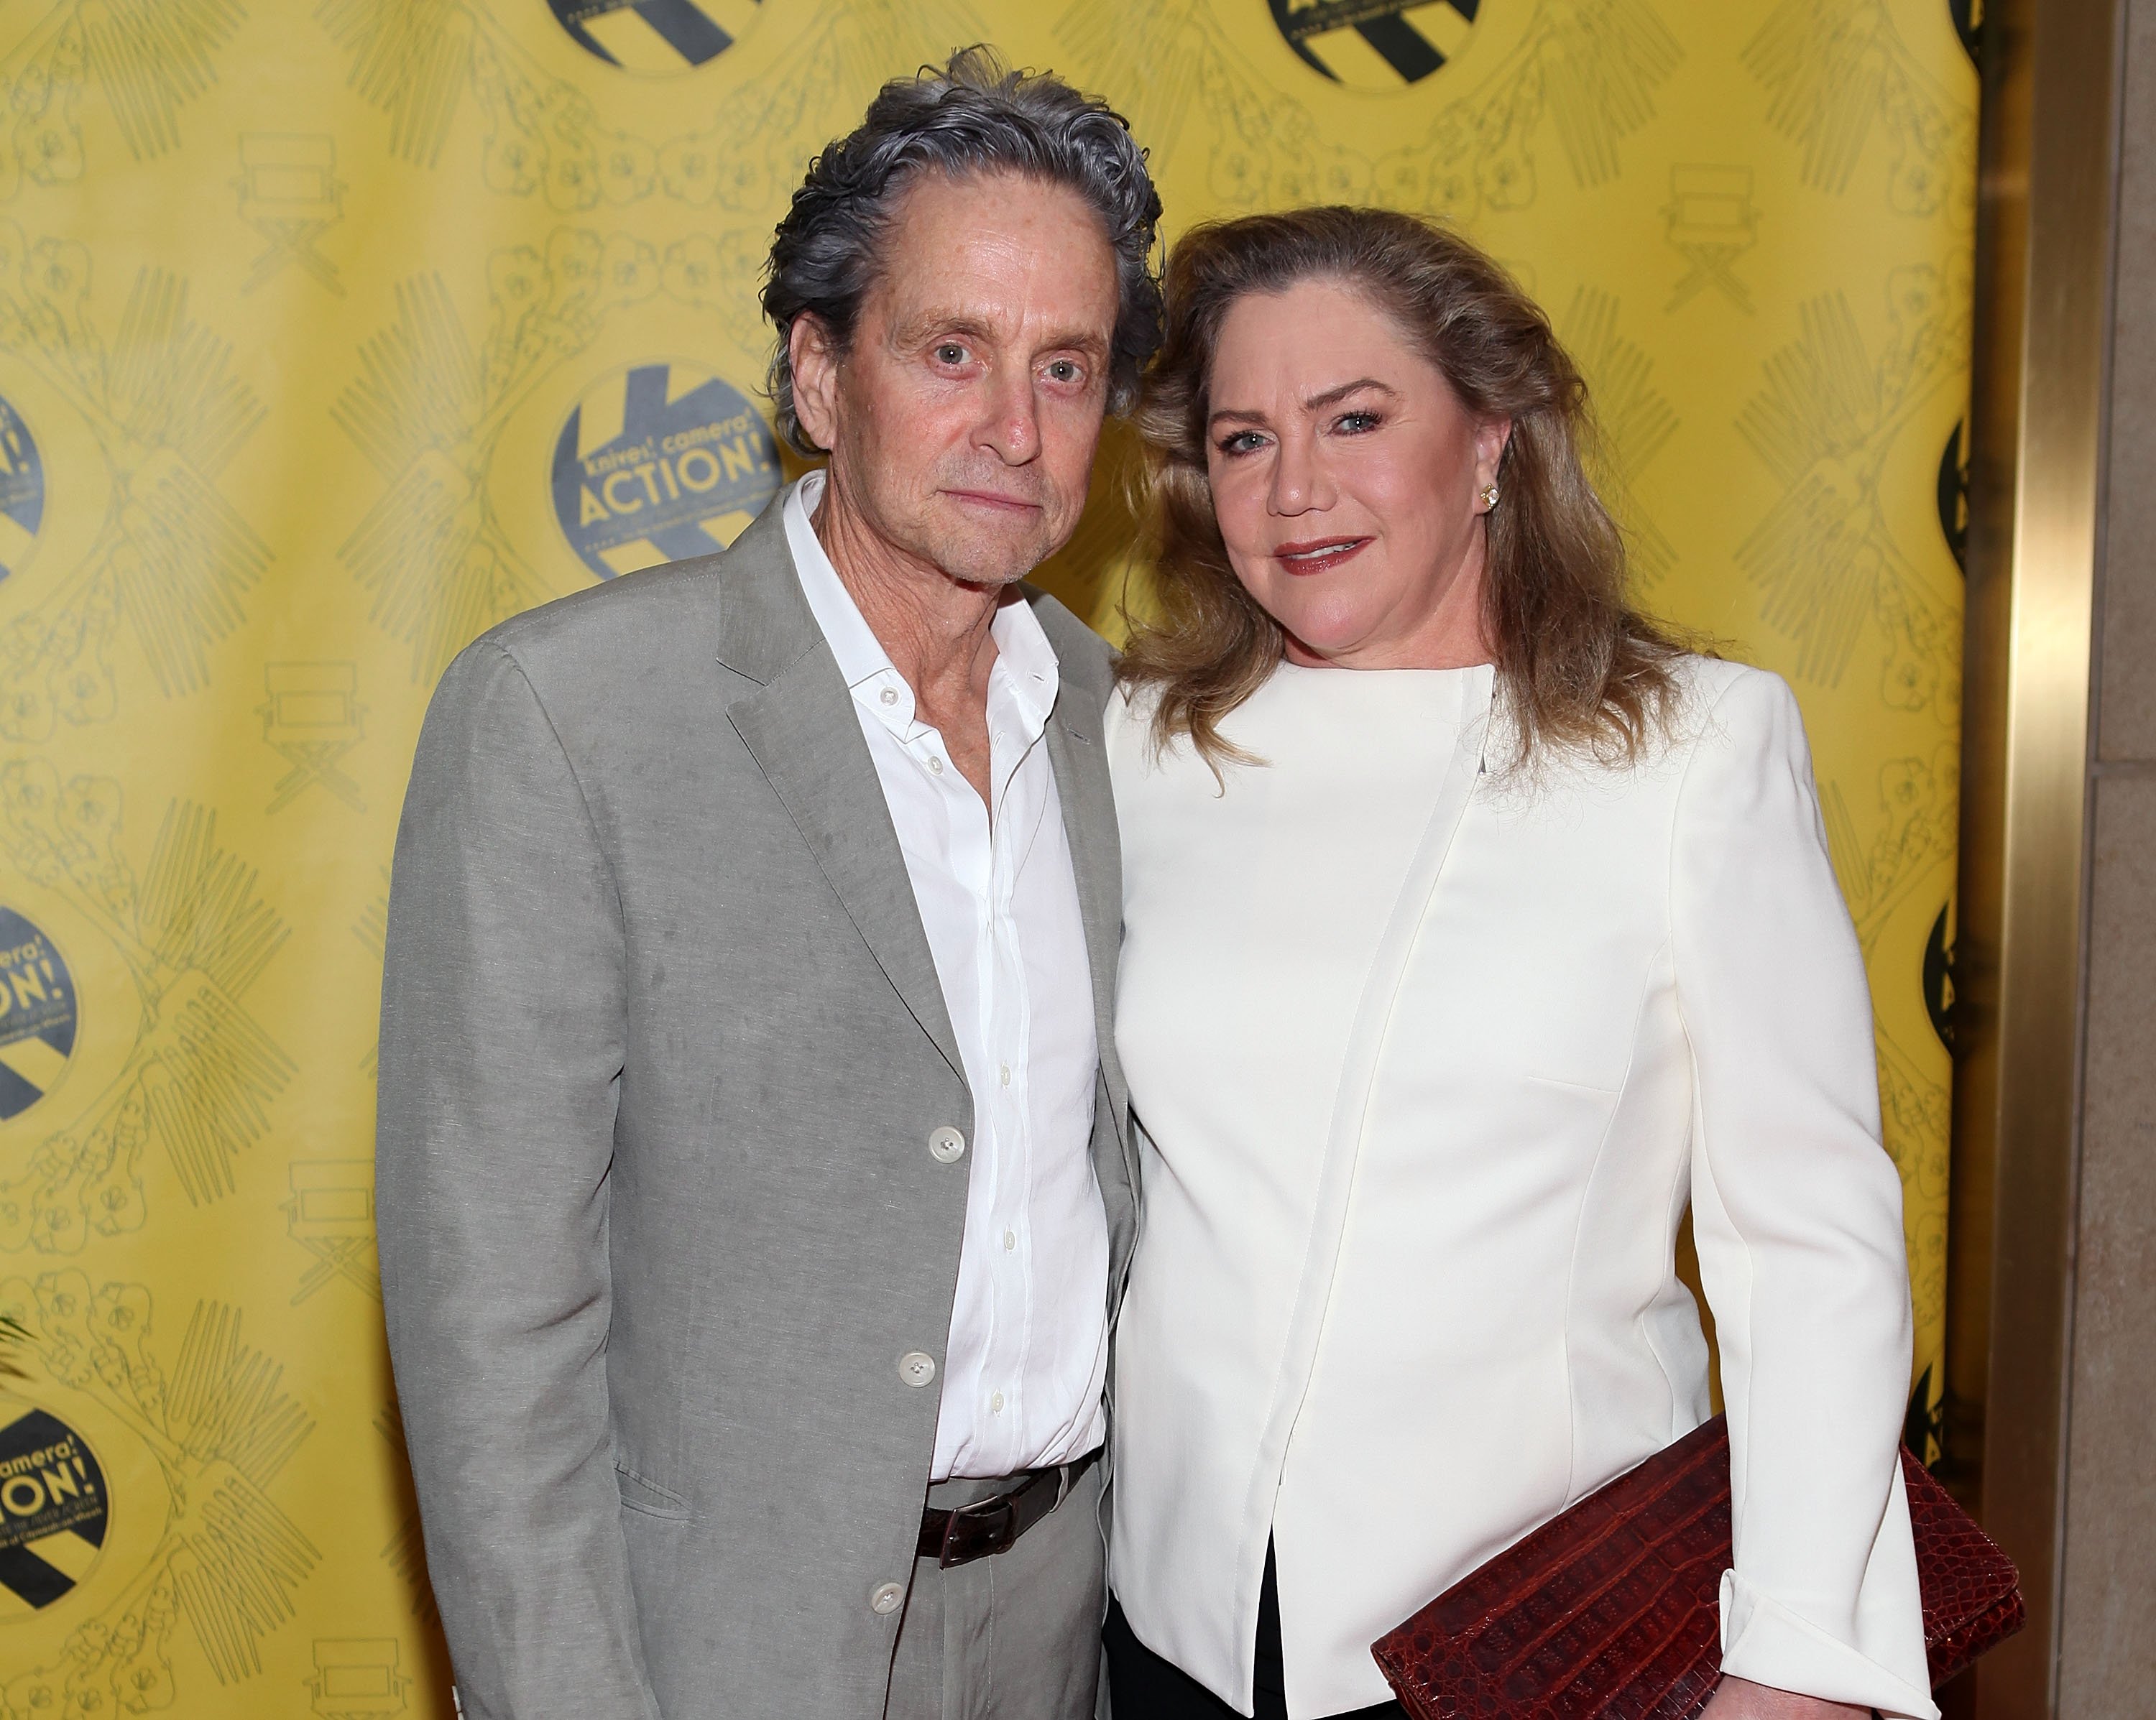 Michael Douglas and Kathleen Turner attending the 27th Annual "Chefs' Tribute To Citymeals-On-Wheels" Benefit at Rockefeller Center on June 4, 2012 in New York City. / Source: Getty Images